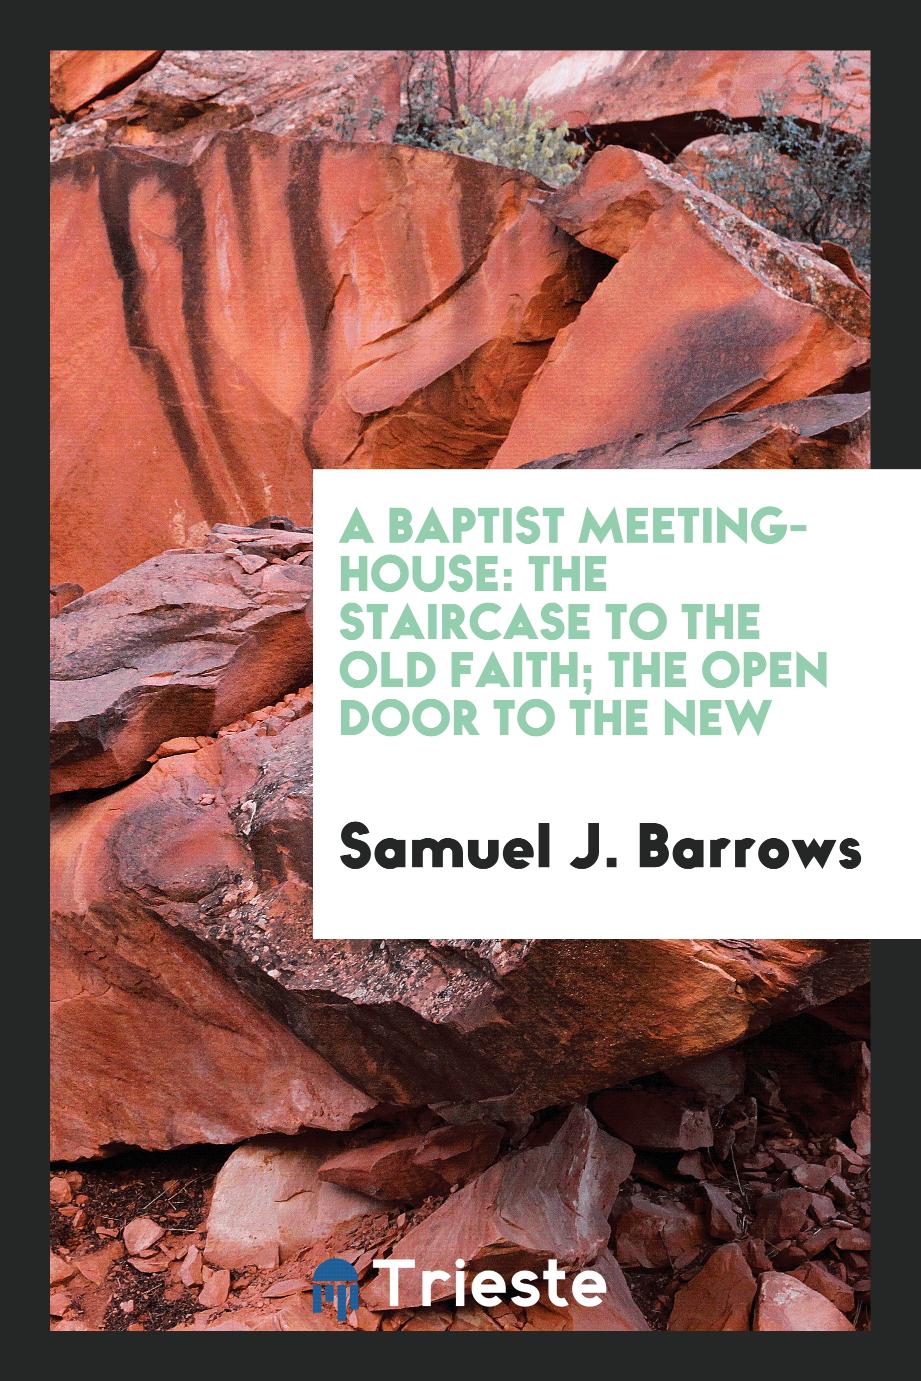 A Baptist meeting-house: the staircase to the old faith; the open door to the new